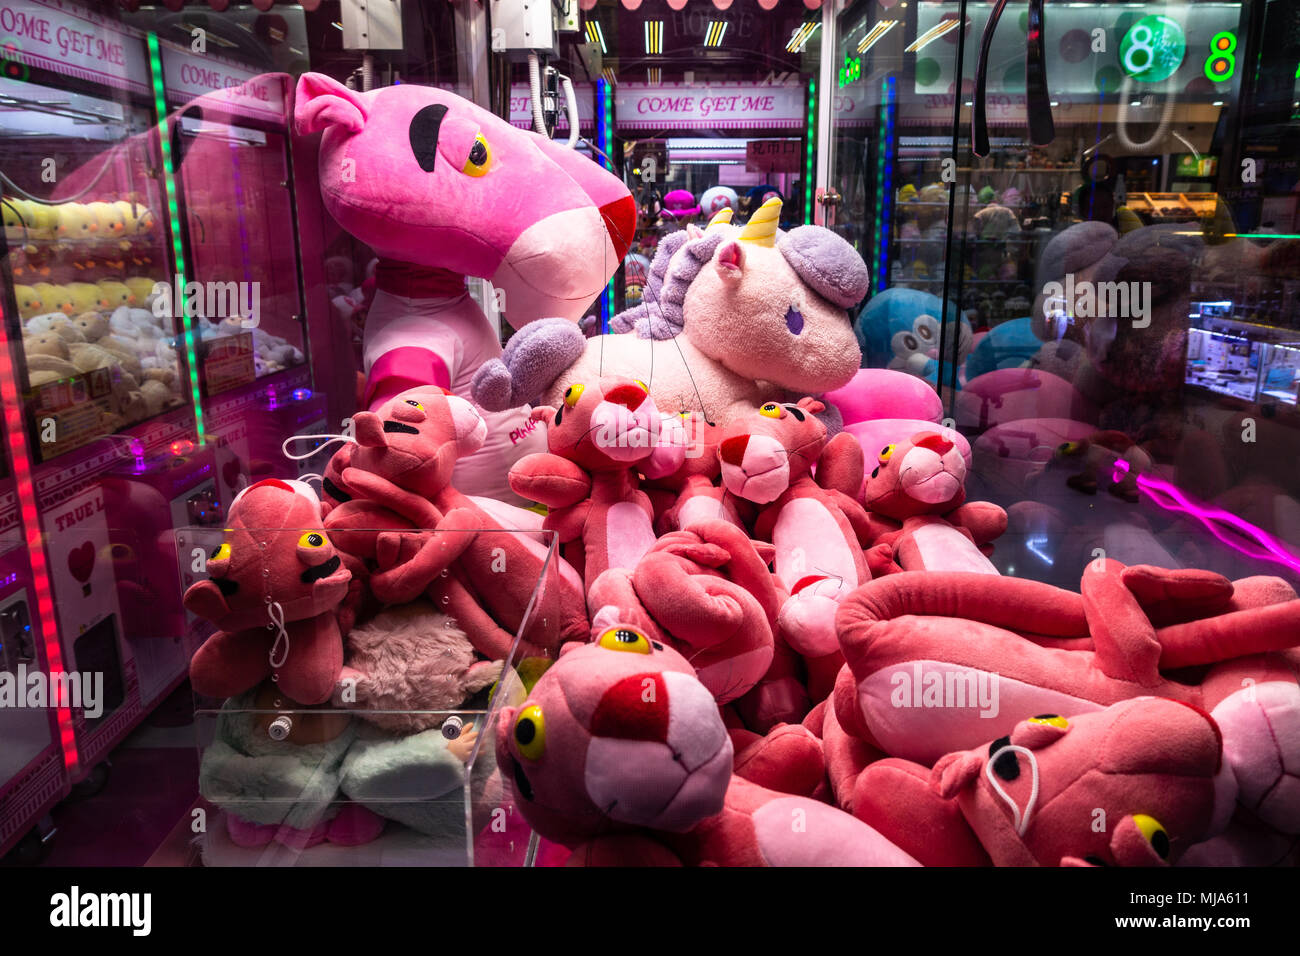 Pink panther plush dolls toys inside a claw machine Stock Photo